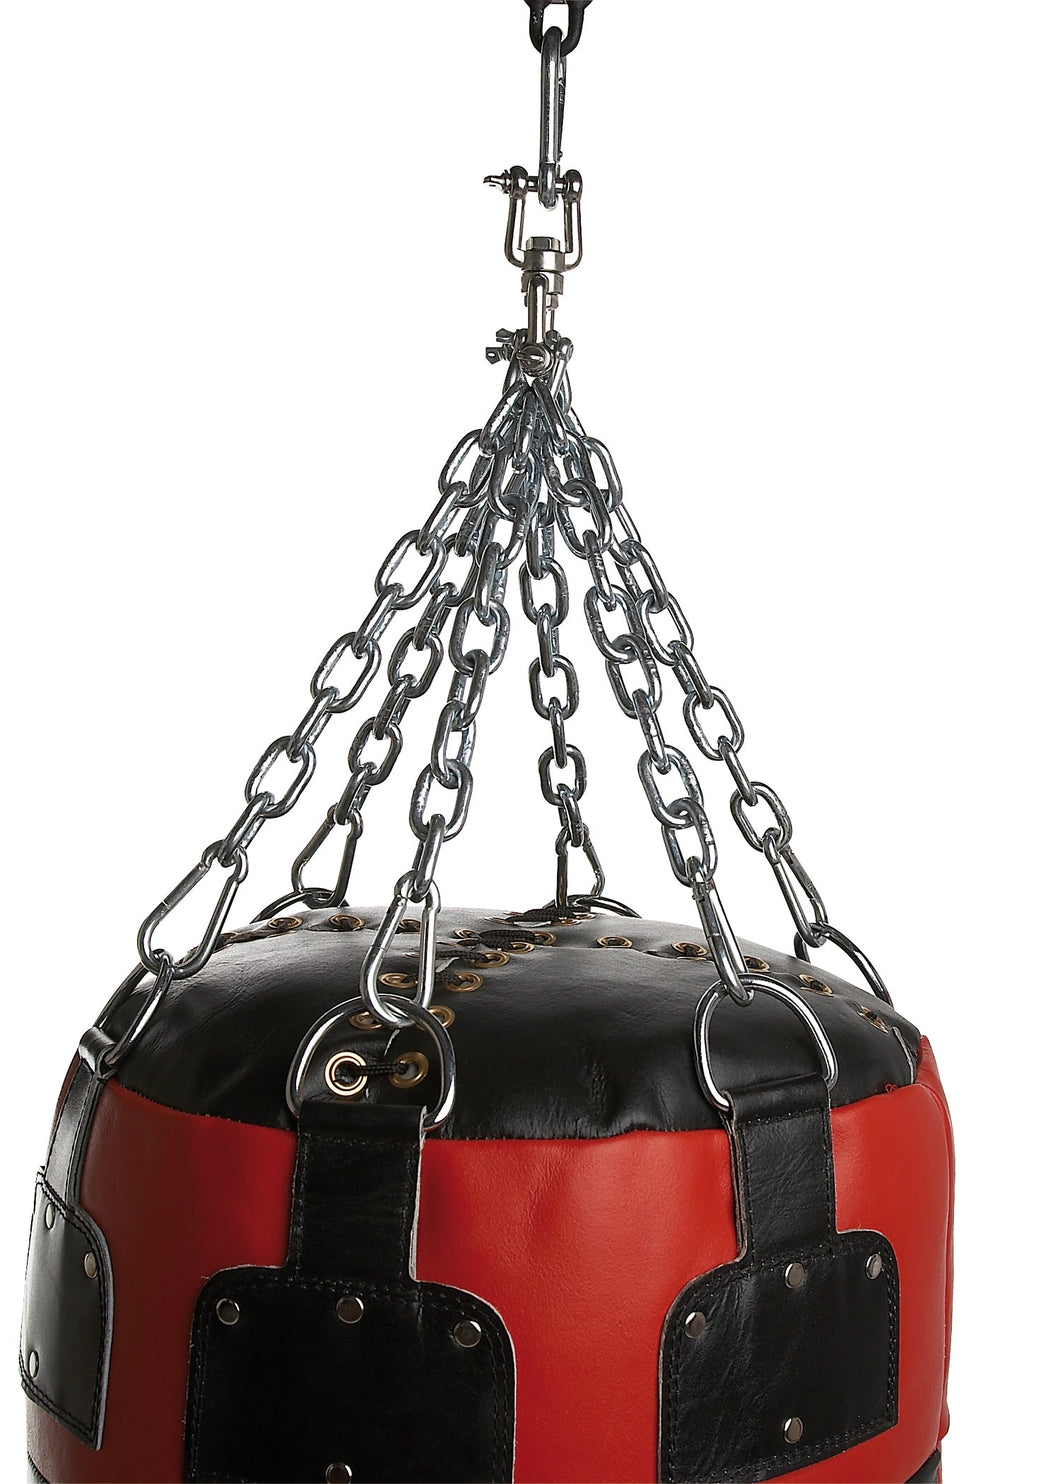 Pro Box Commercial Six Leg Swivel Punch Bag Chains - FightstorePro